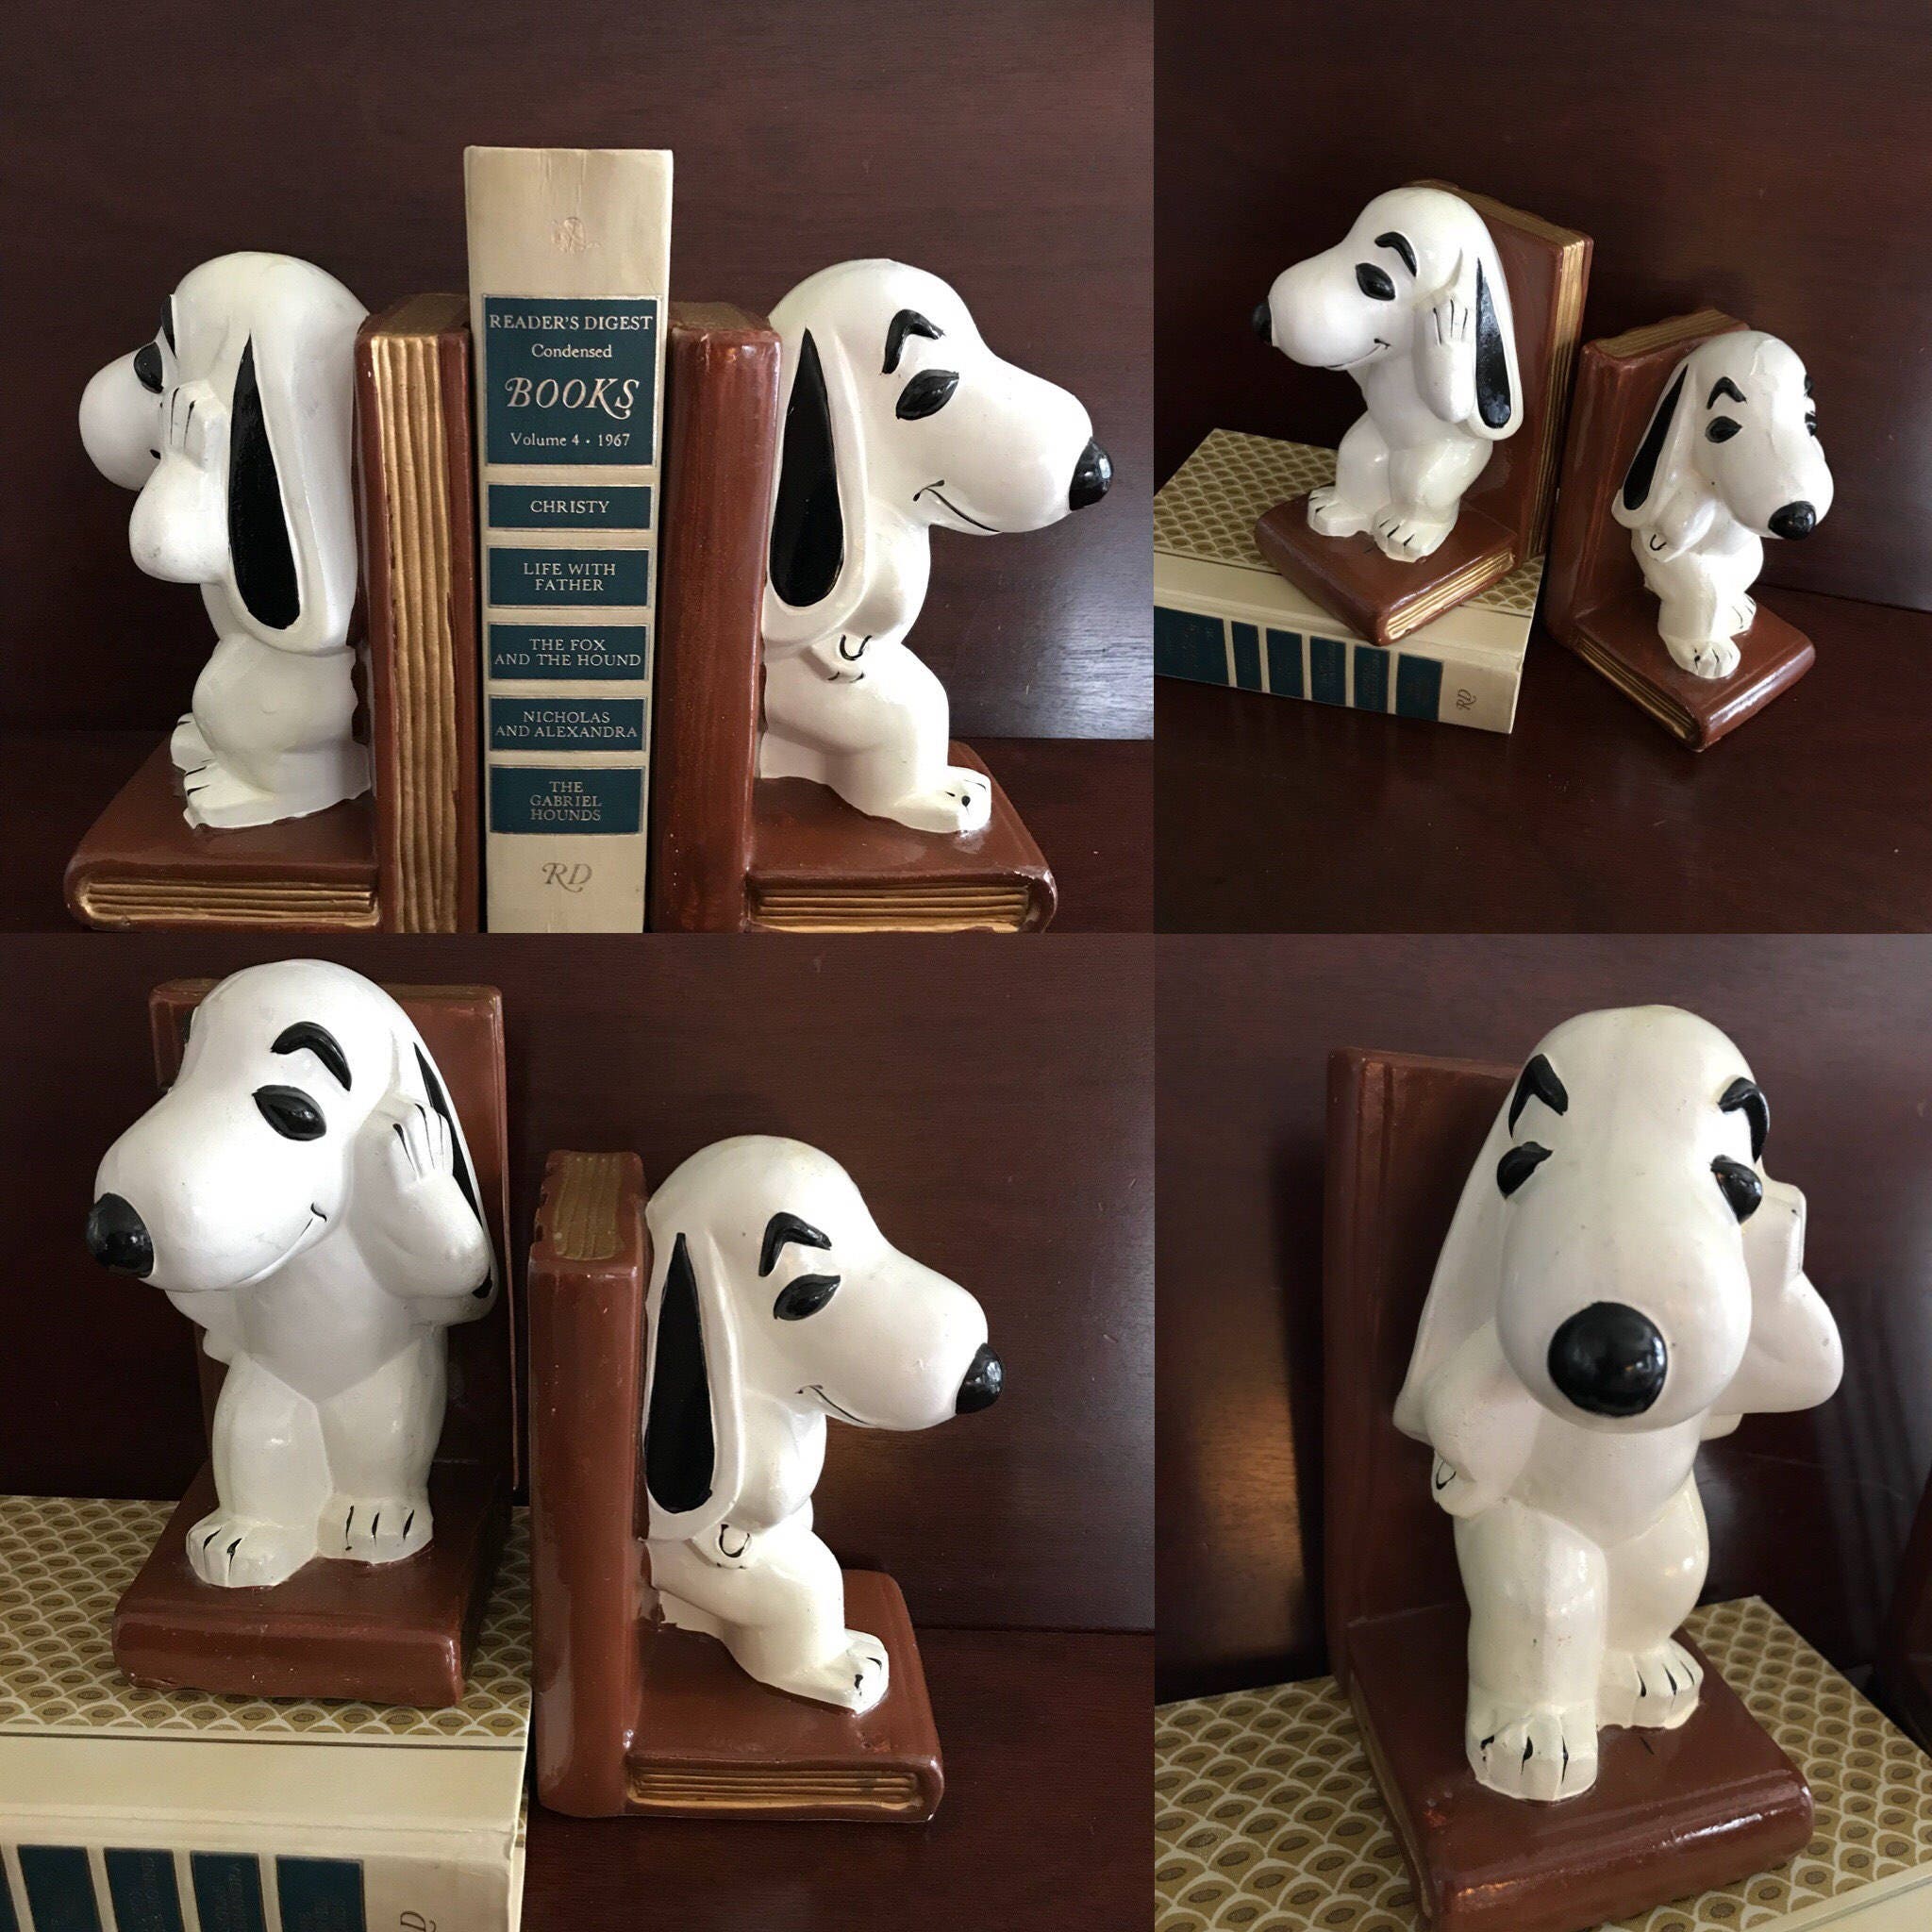 Snoopy Bookends Rare Collectible Painted Snoopy Dog Bookends Snoopy Beagle Decor Gift For Dog Lovers Peanuts Cartoon Character Library